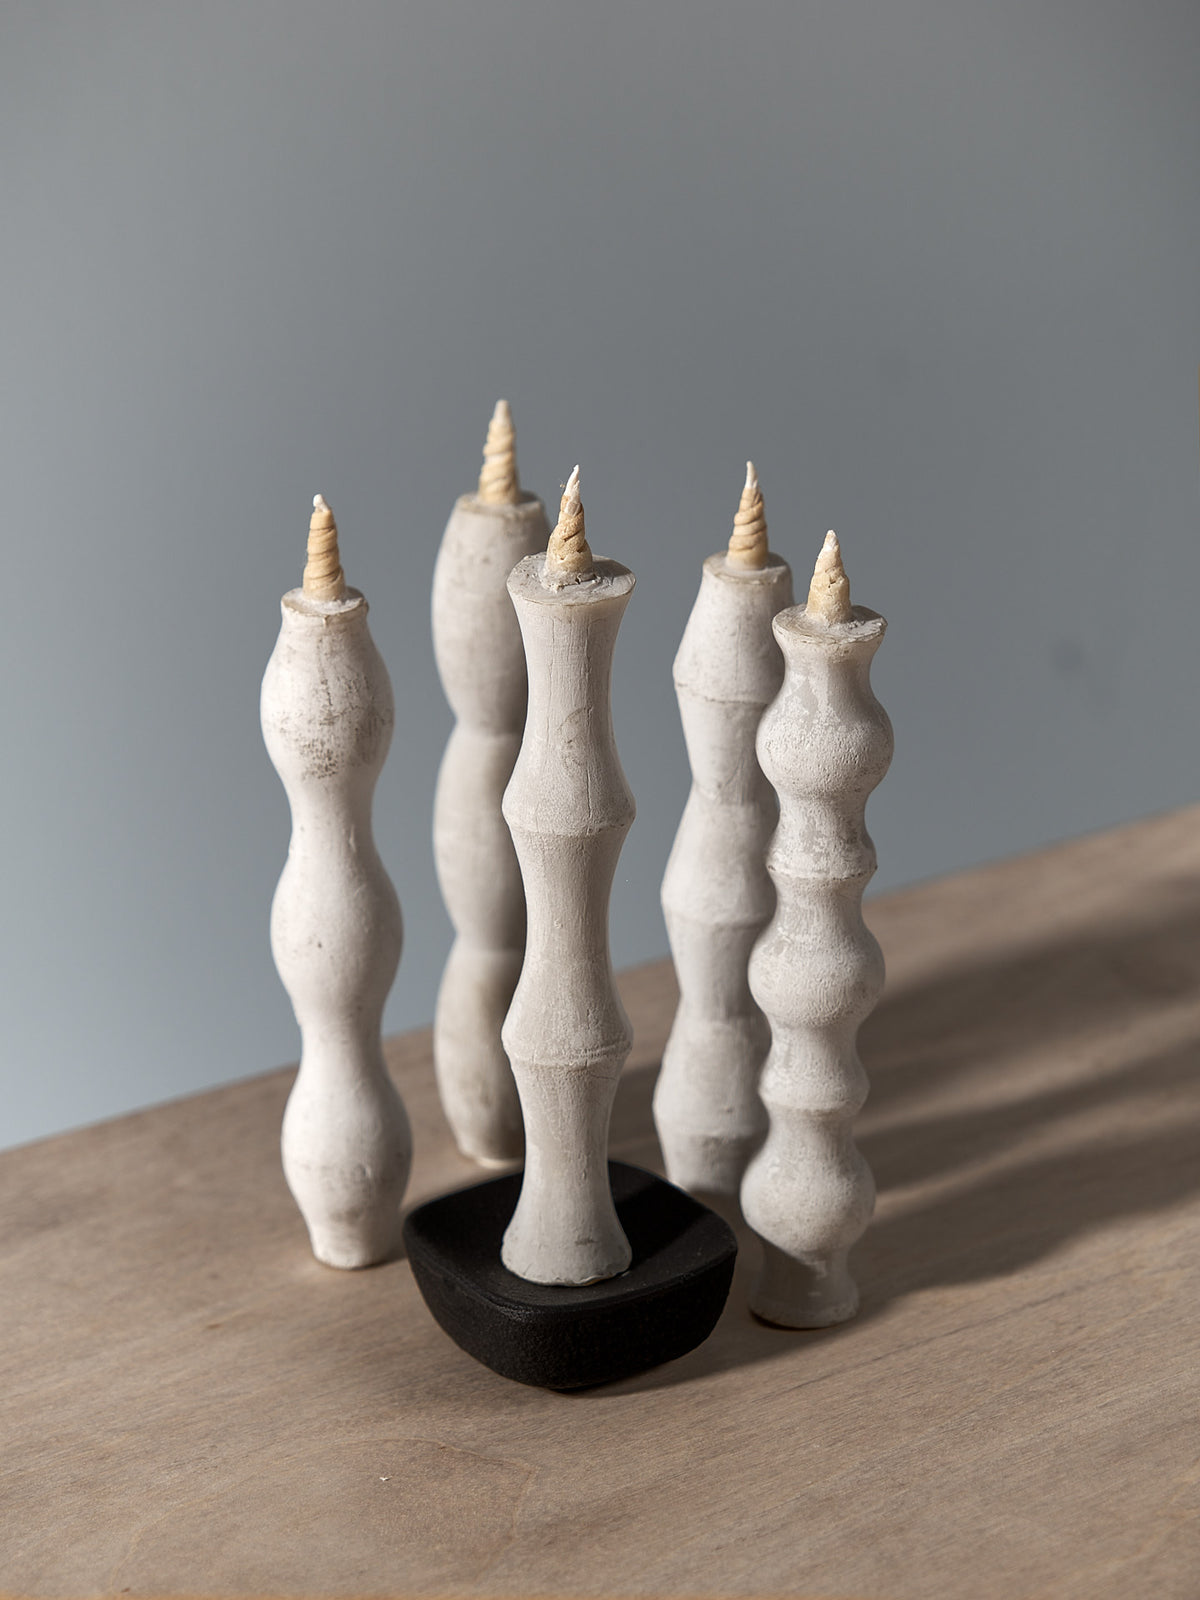 Four NANAO-A candle holders on a wooden table. Brand: Takazawa.